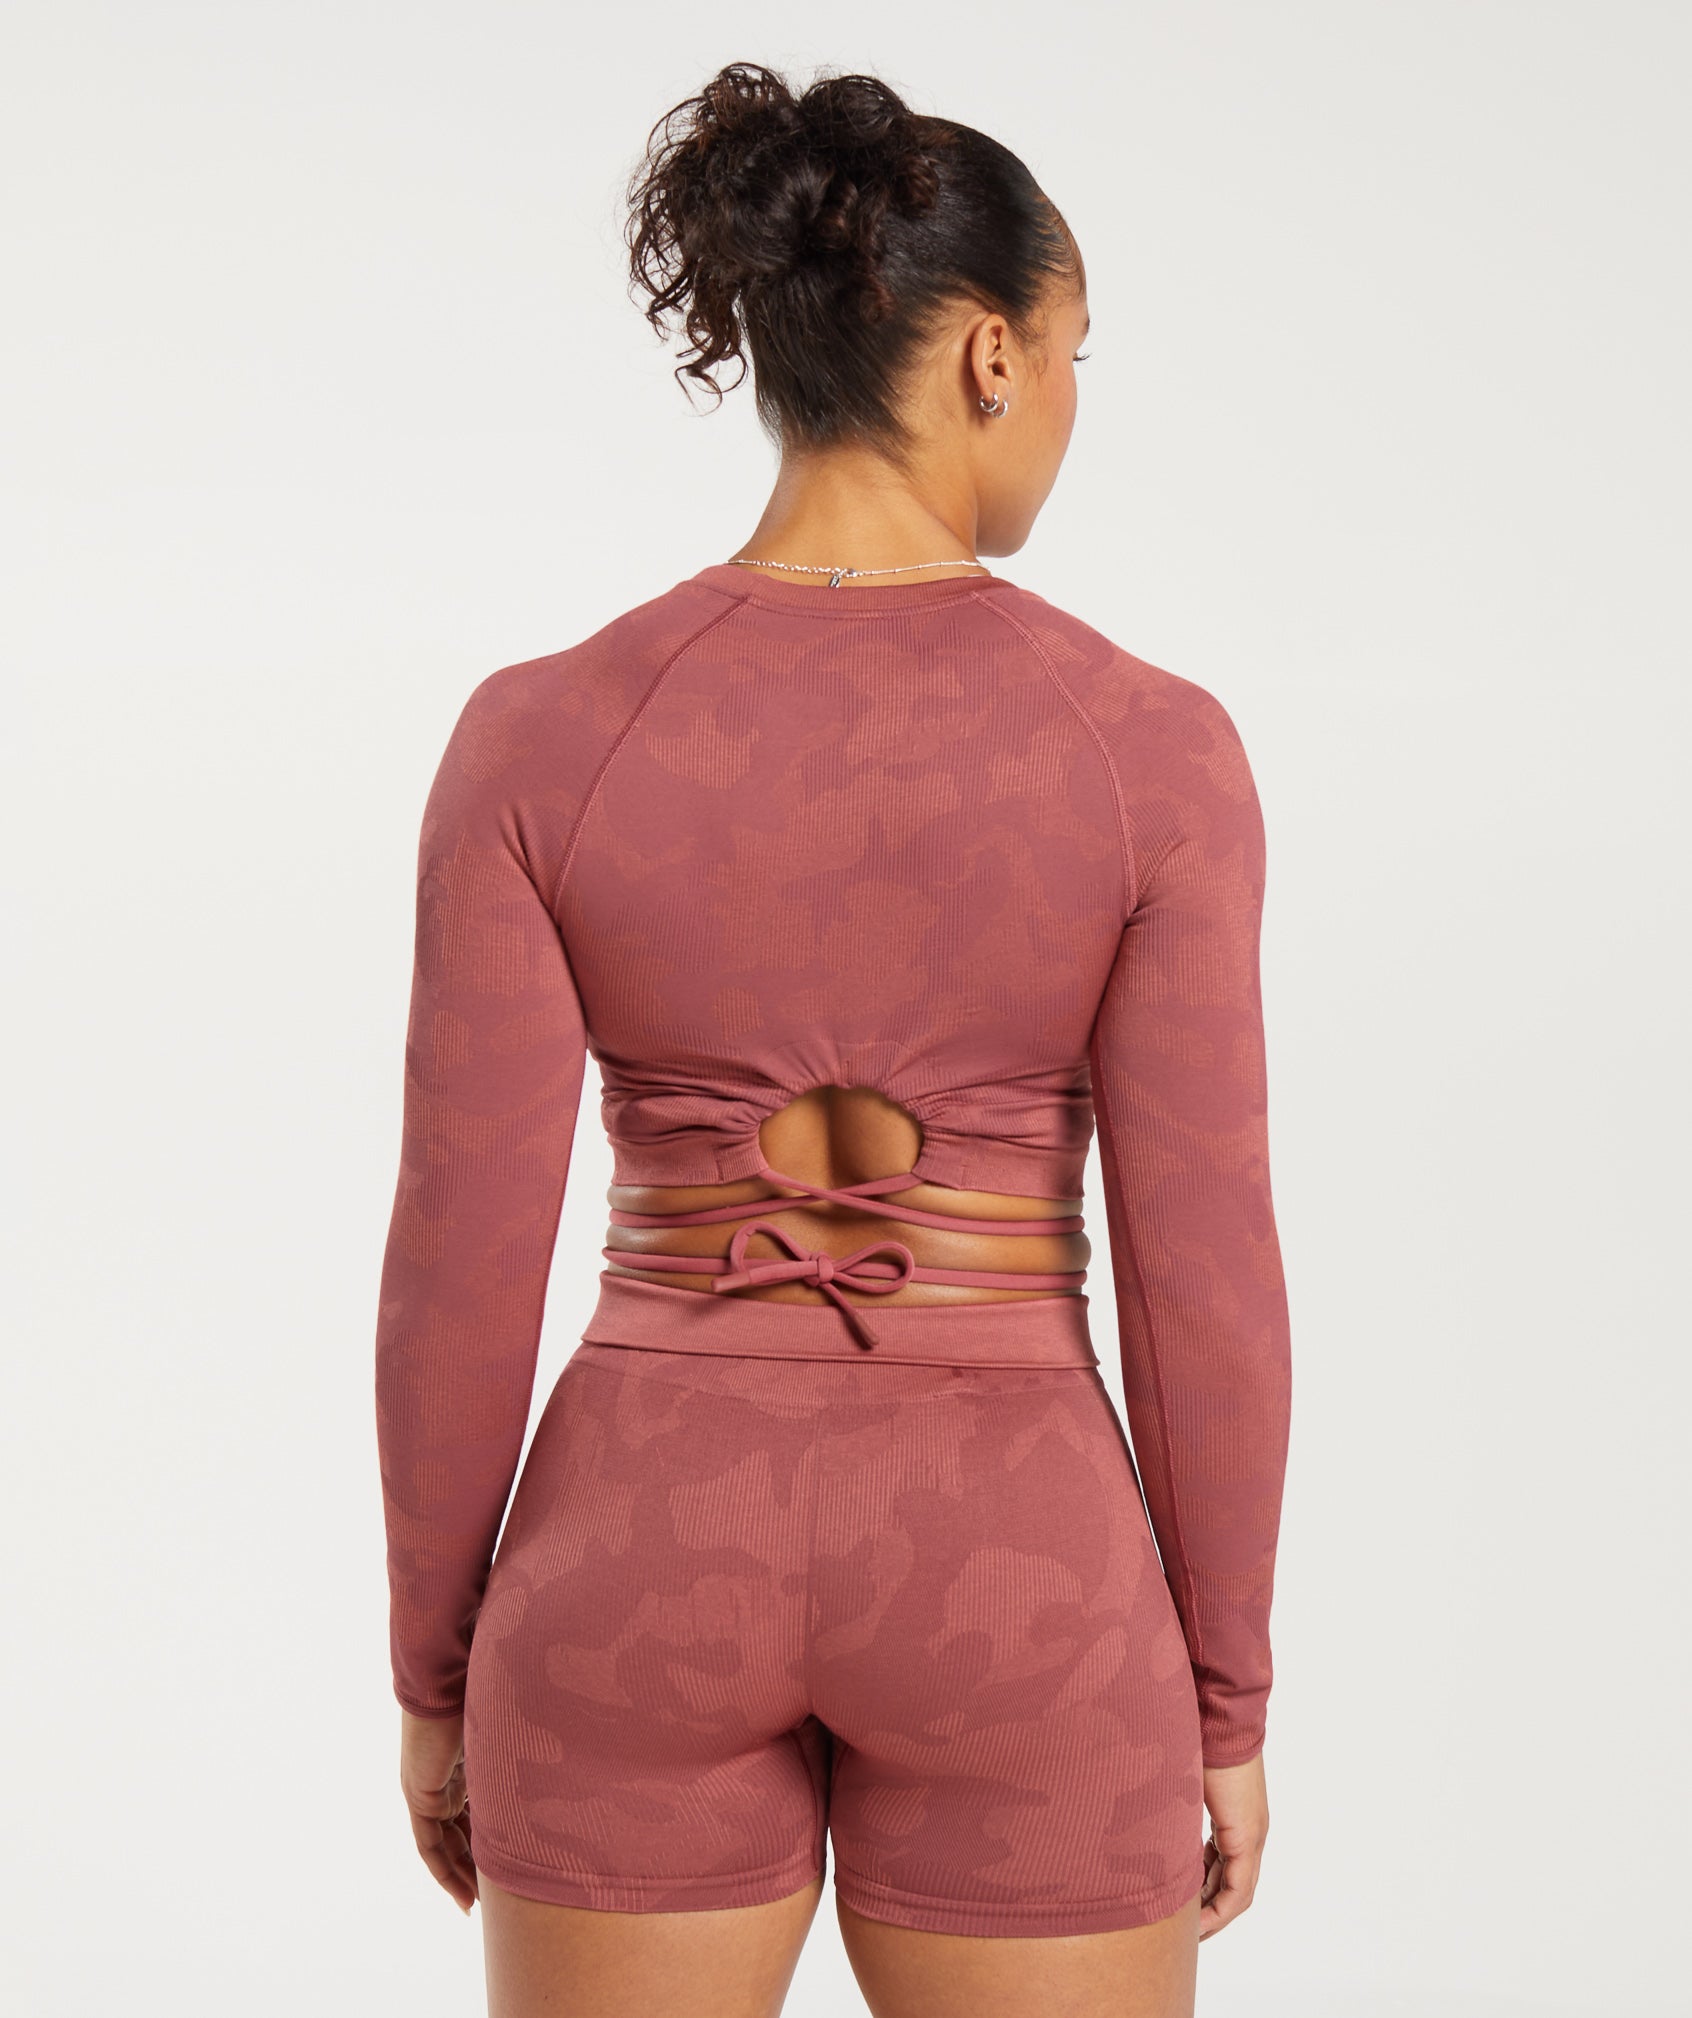 Adapt Camo Seamless Ribbed Long Sleeve Crop Top in Soft Berry/Sunbaked Pink - view 2